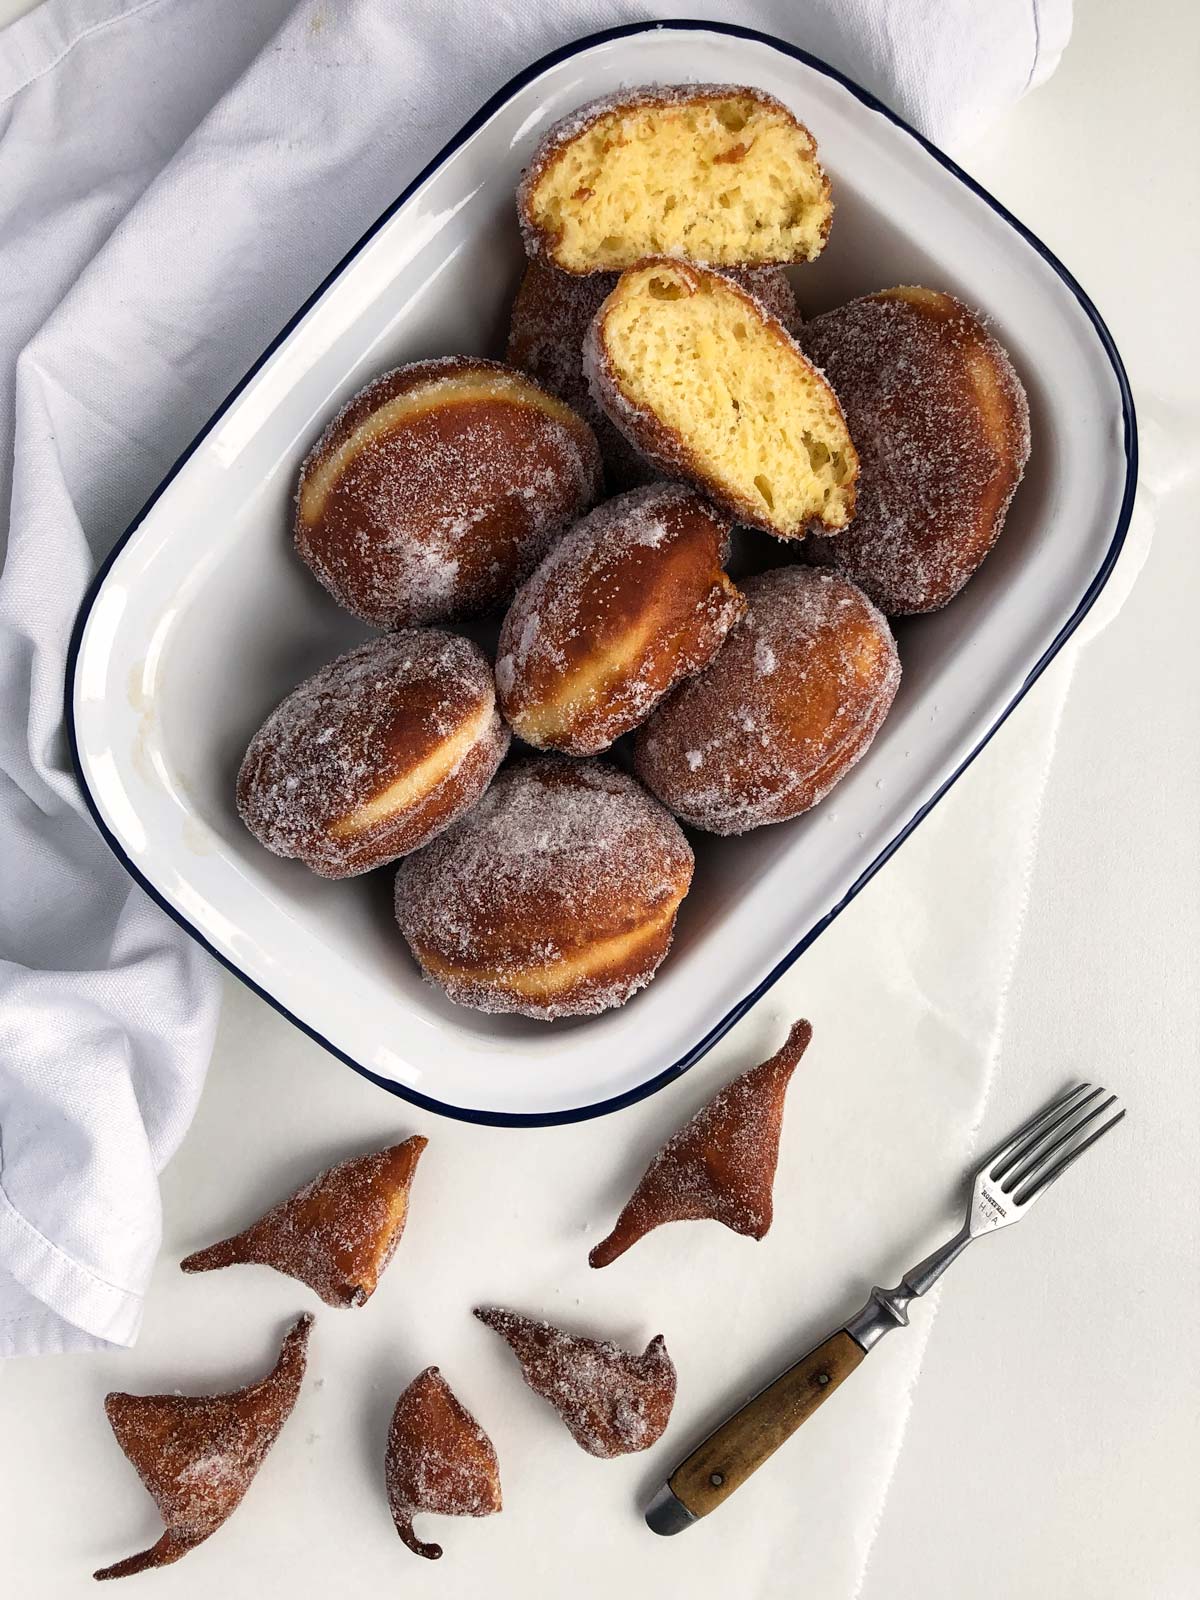 Lovely golden-brown doughnuts dusted with sugar in a white dish.